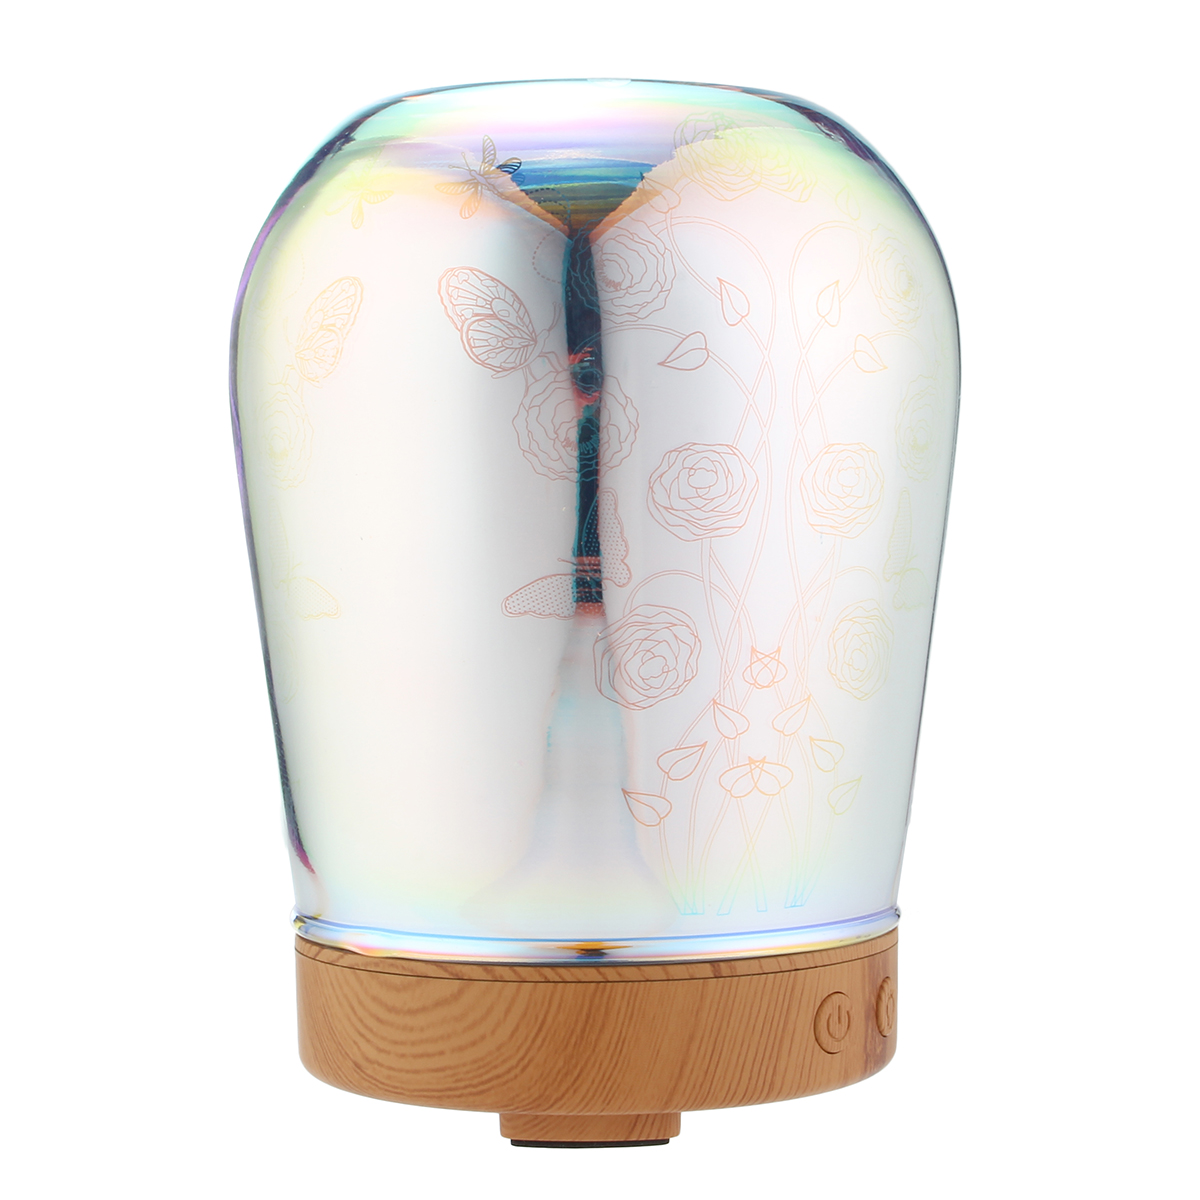 

100-240V 3D Effect LED Light Essential Aroma Oil Diffuser Ultrasonic Humidifier Aromatherapy